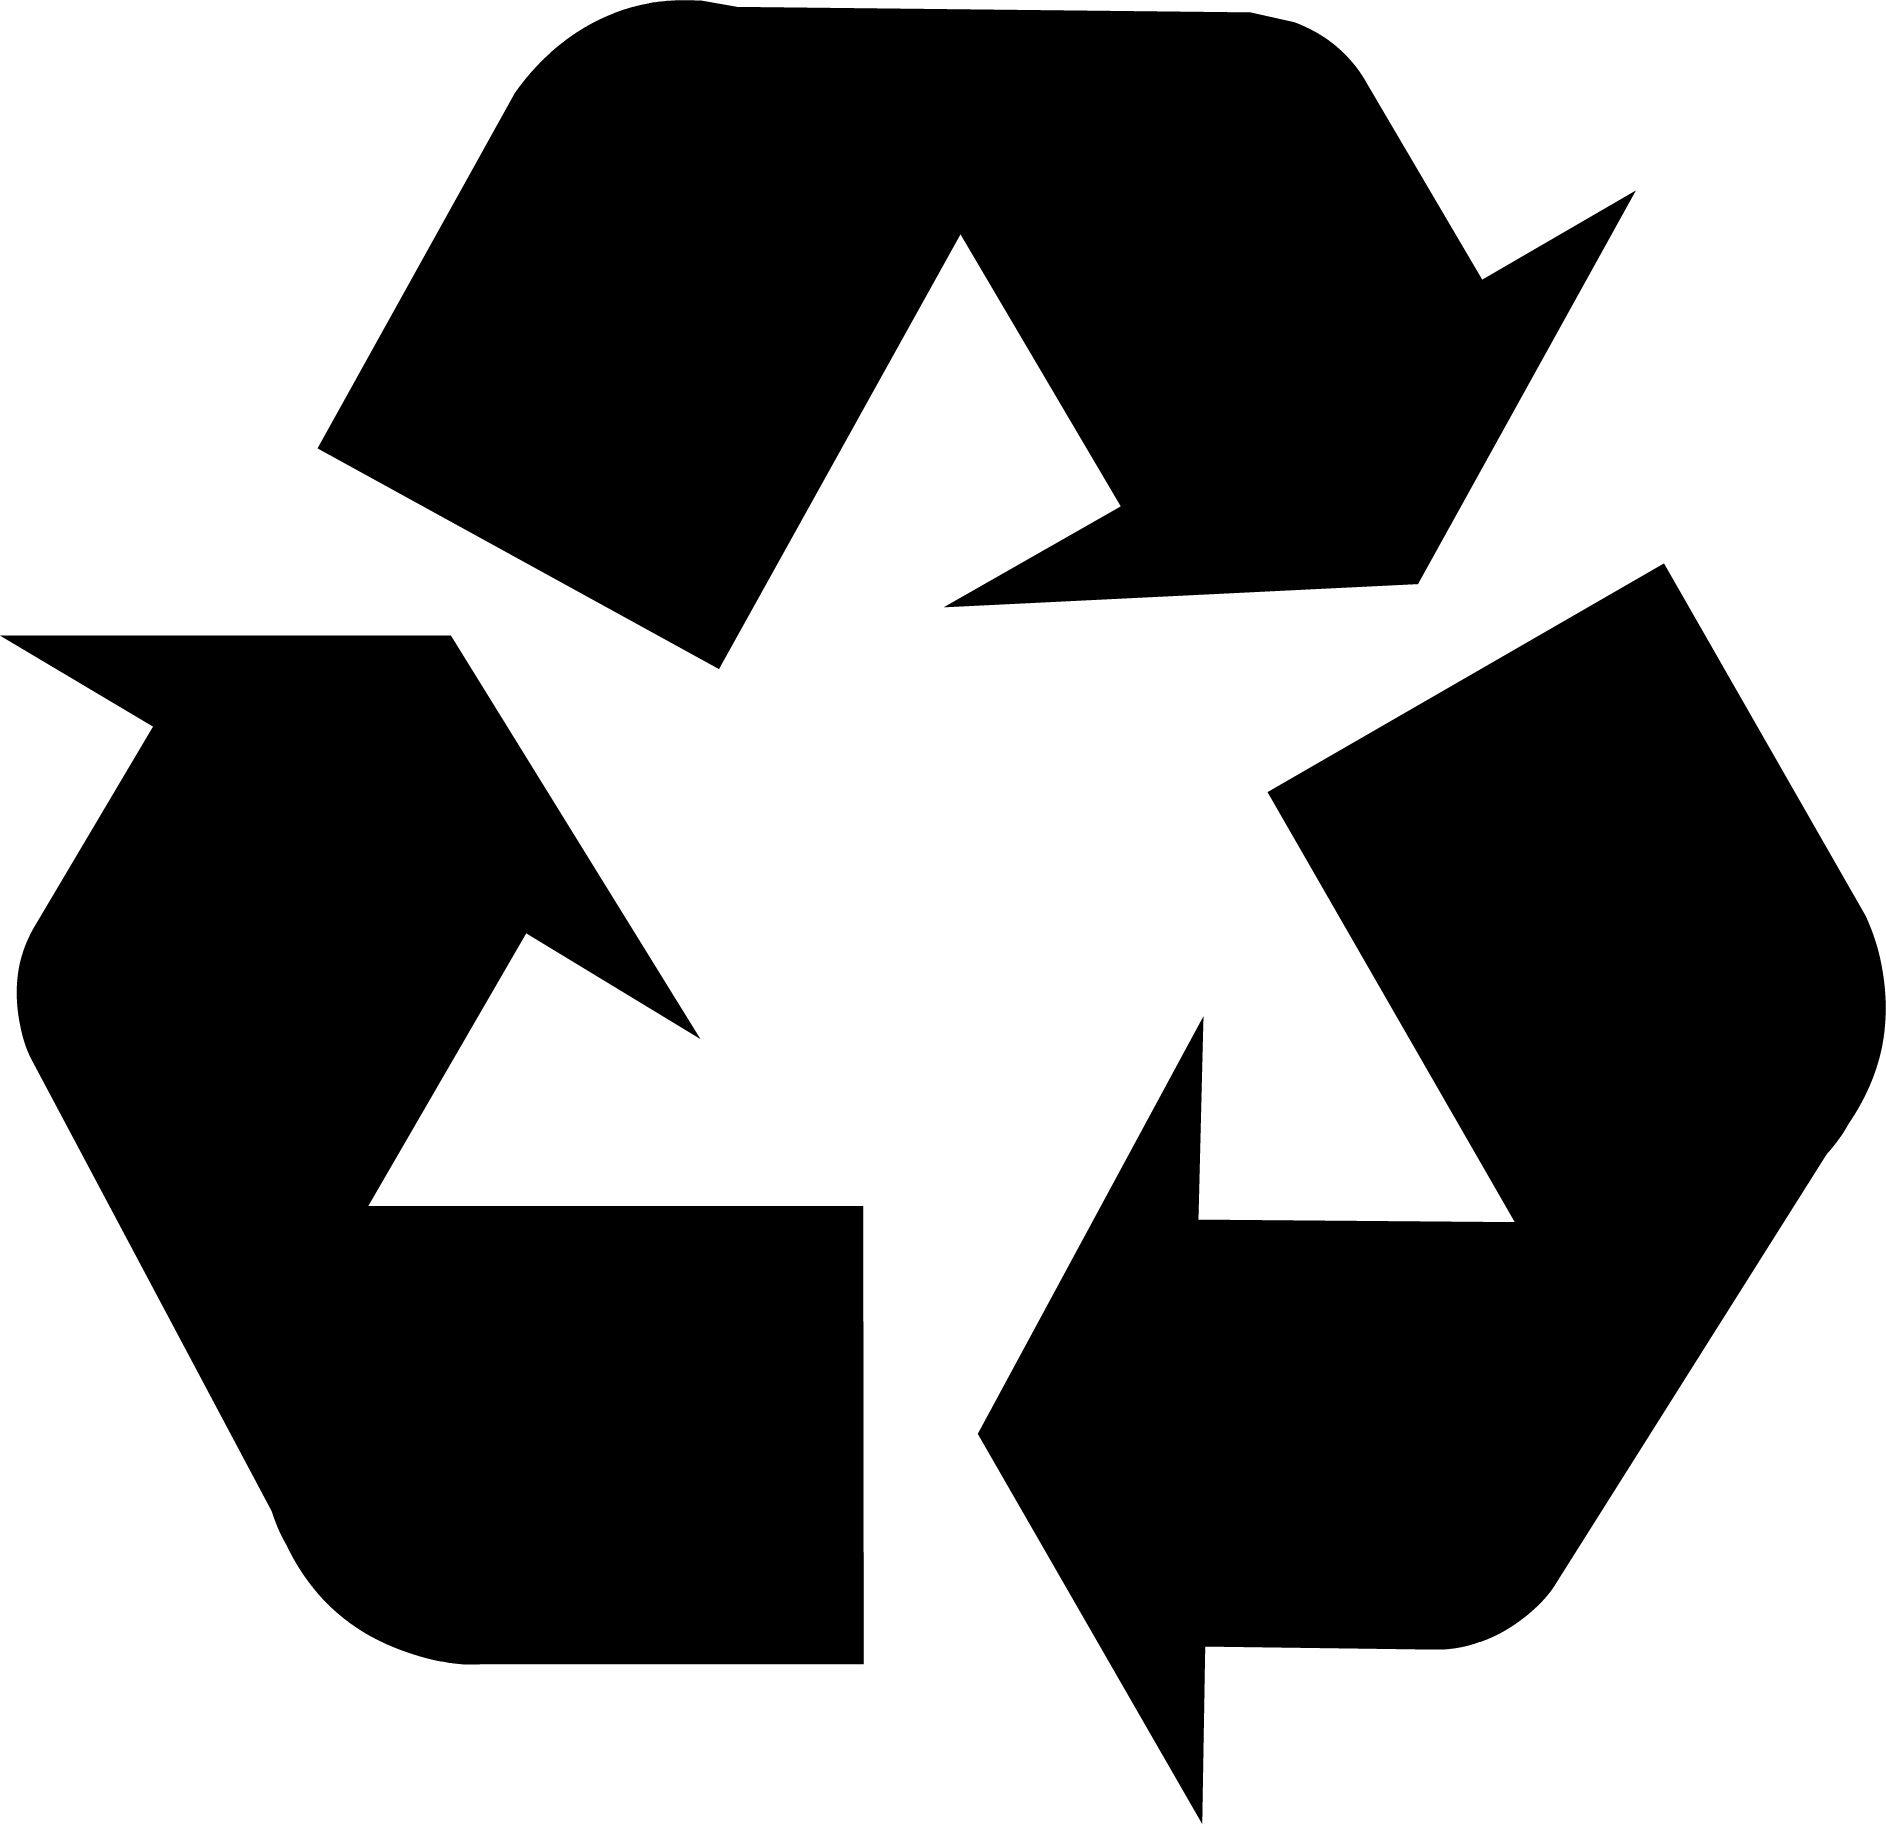 Rycling Logo - Recycling Symbol - Download the Original Recycle Logo